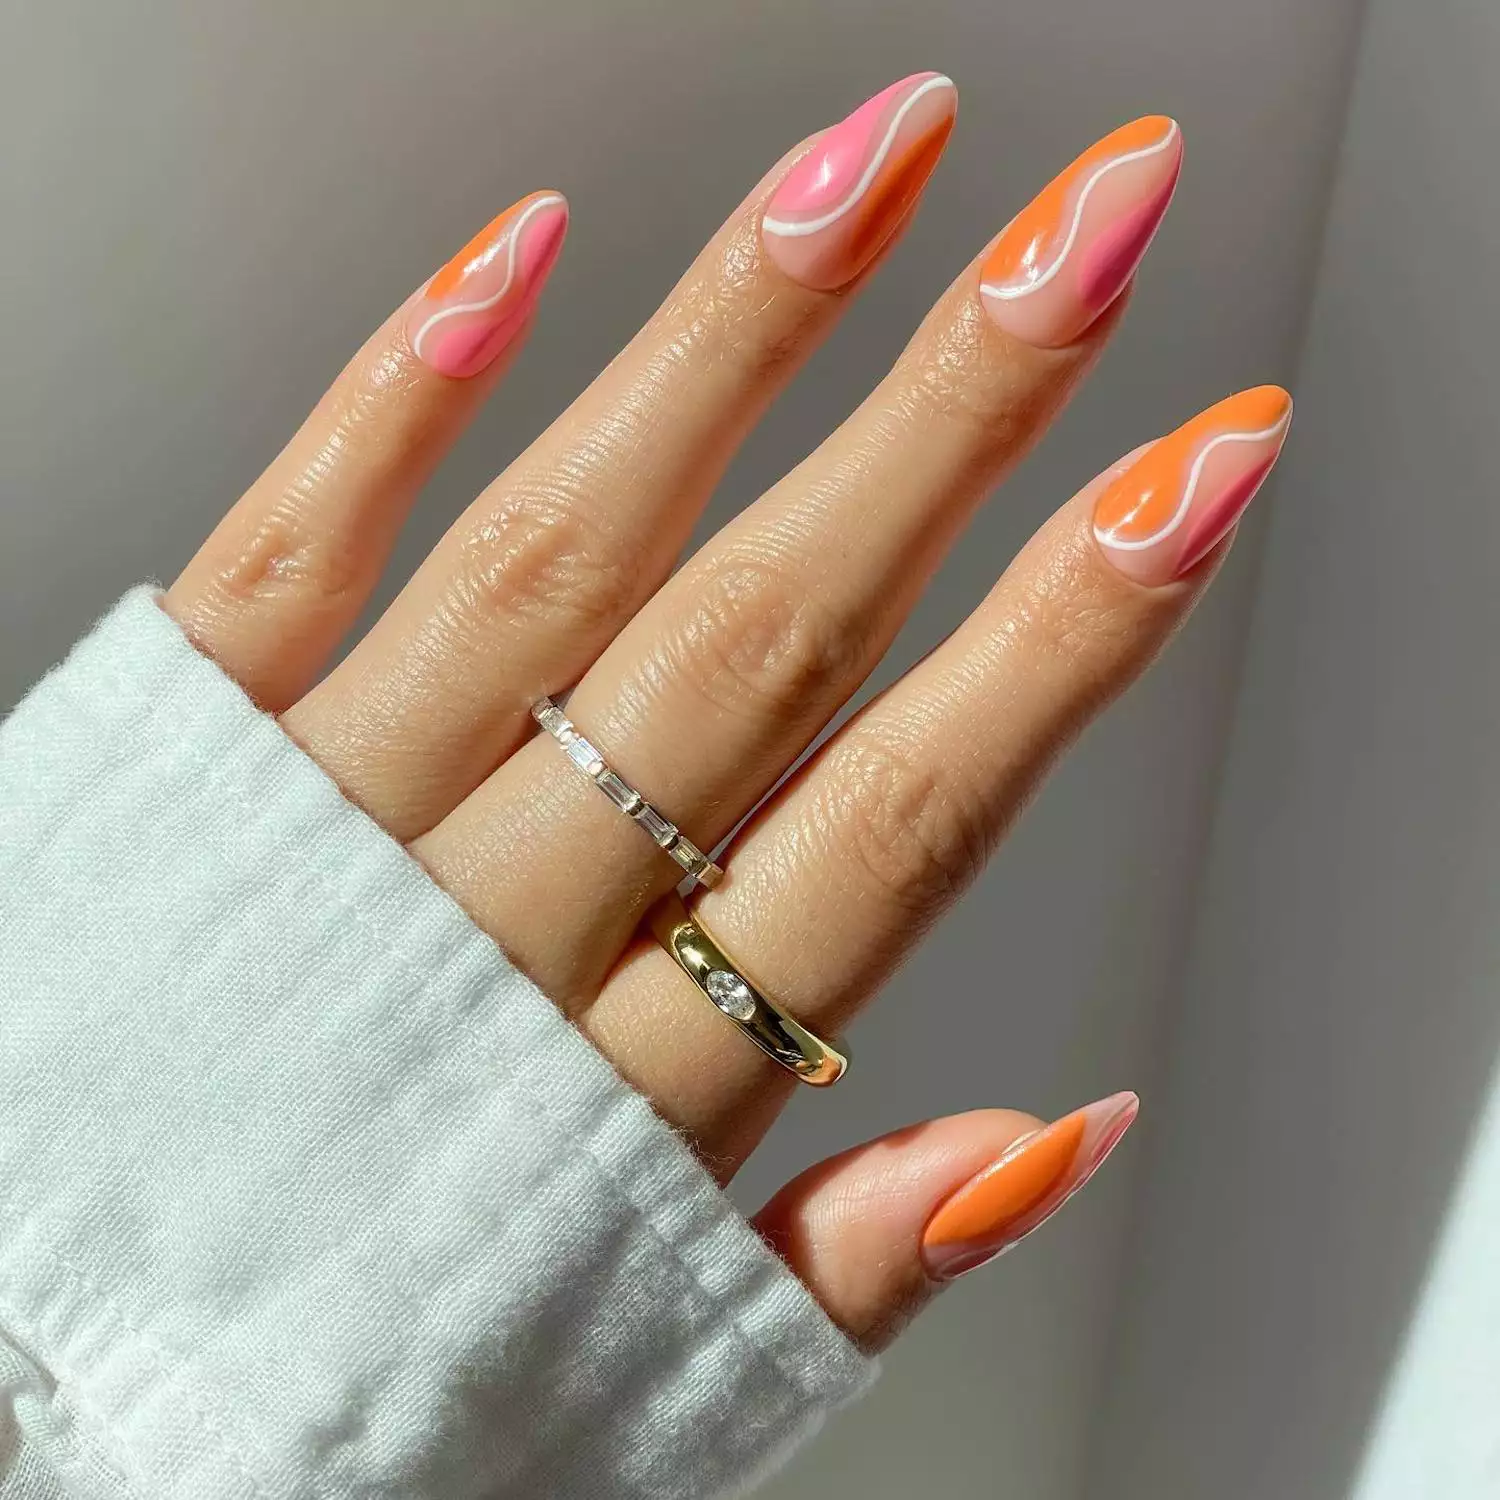 Manicure with abstract wavy pink and orange design with white accent lines